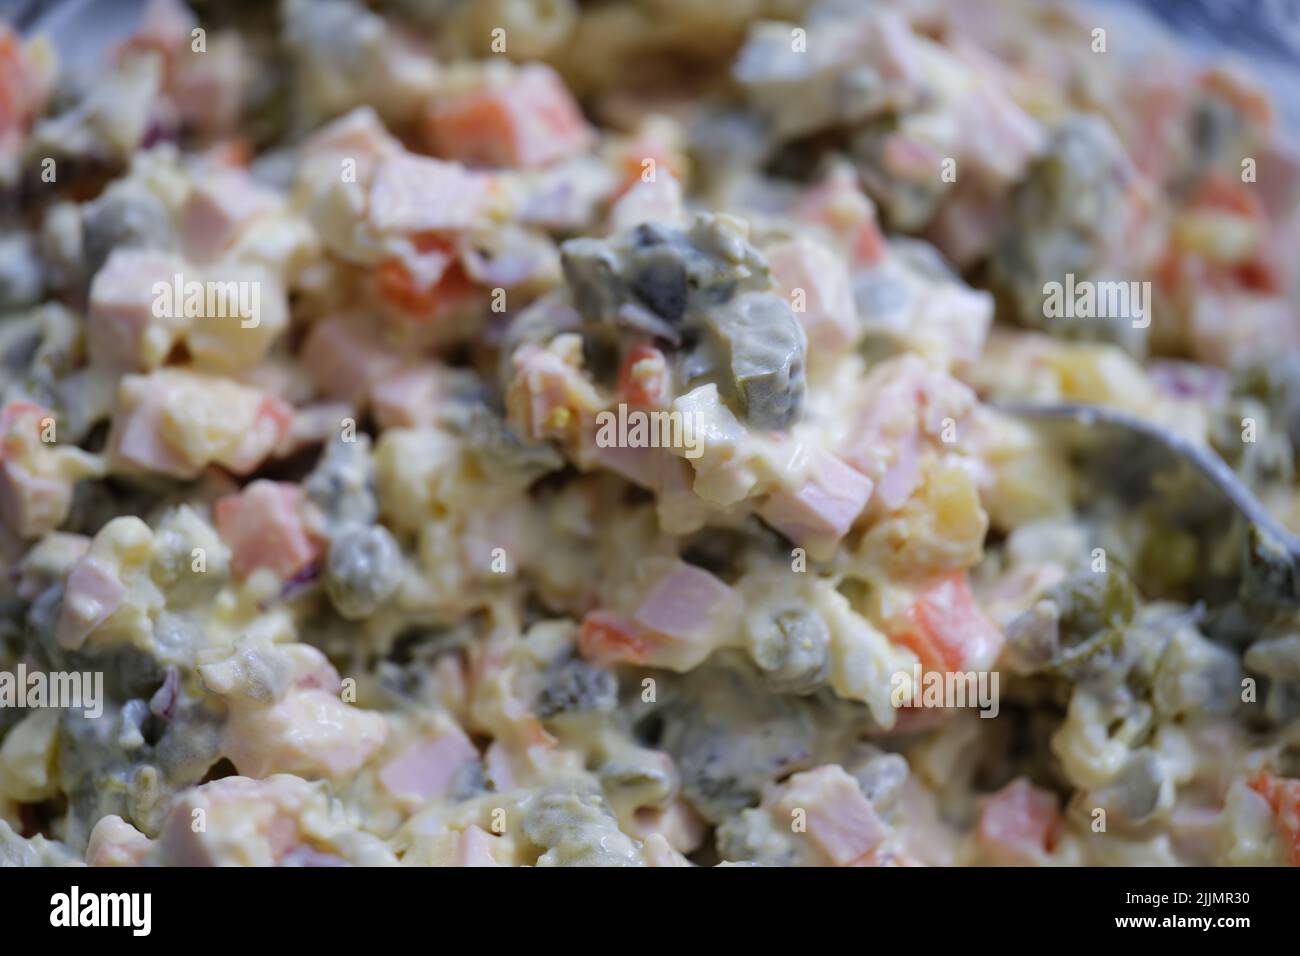 Olivier salad and food ingredients green peas cucumber potatoes sausage and mayonnaise Stock Photo